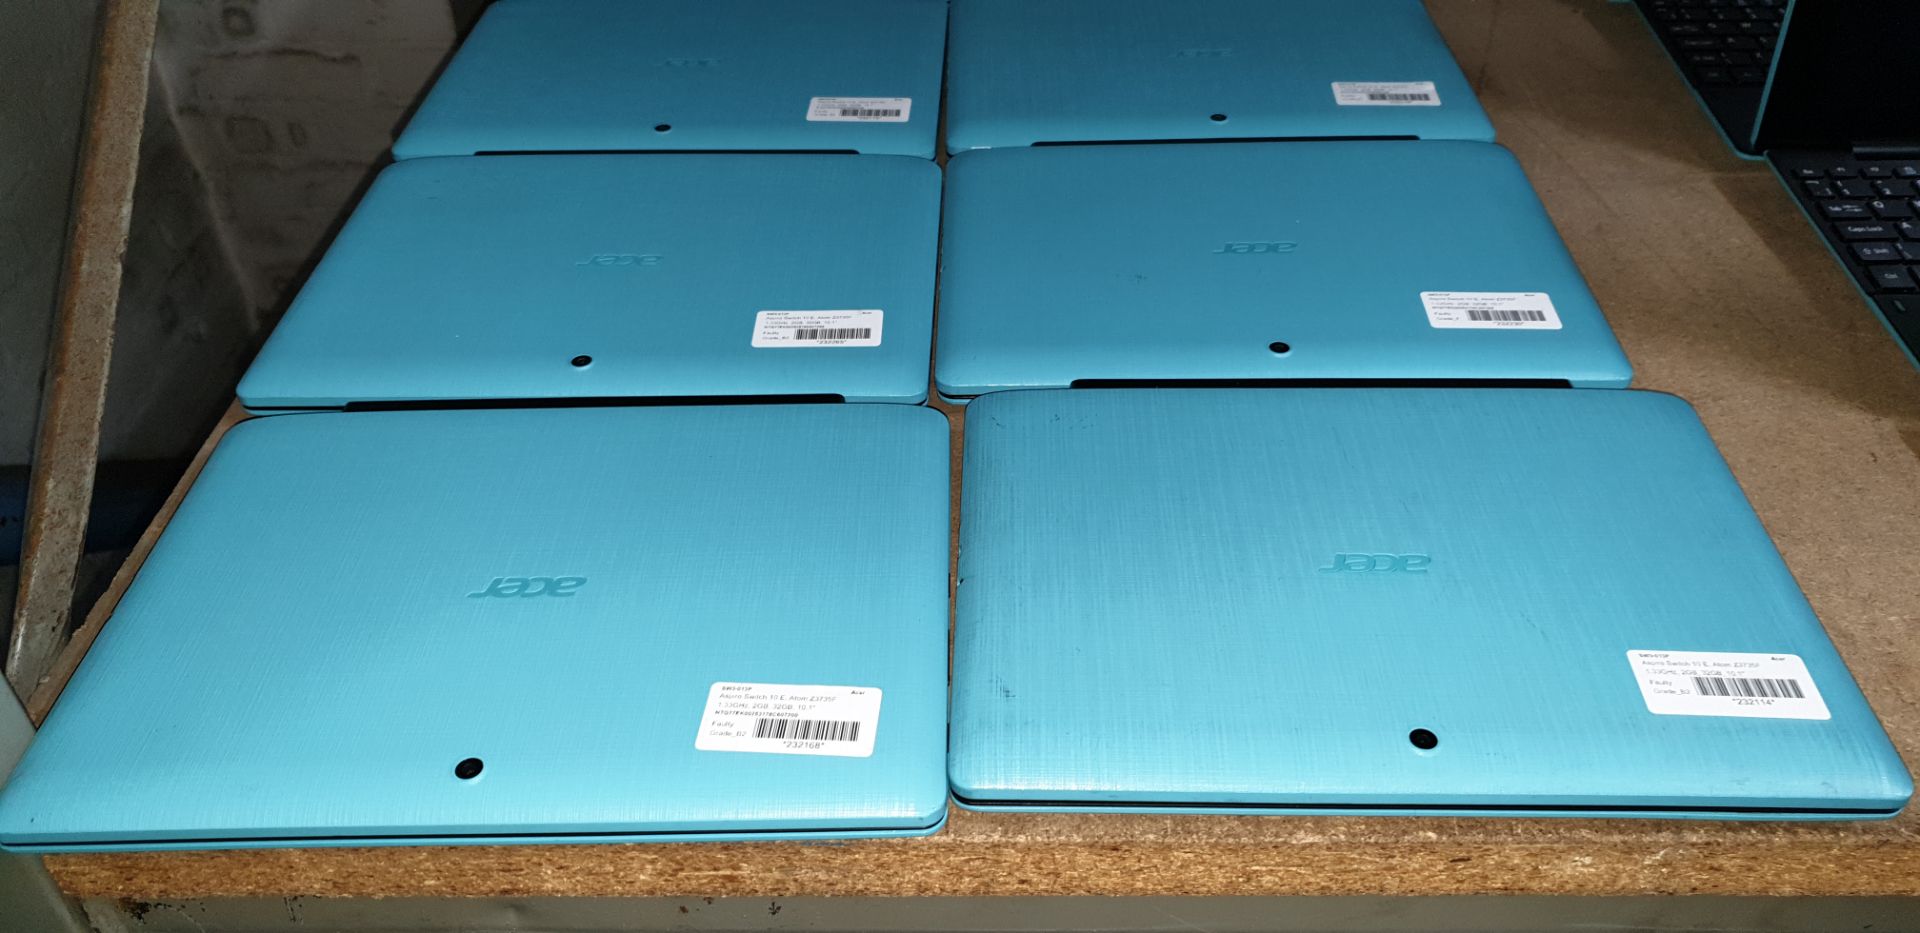 8 off Acer Switch 10E Atom computers with touchscreen displays & detachable keyboards. No power pack - Image 11 of 23